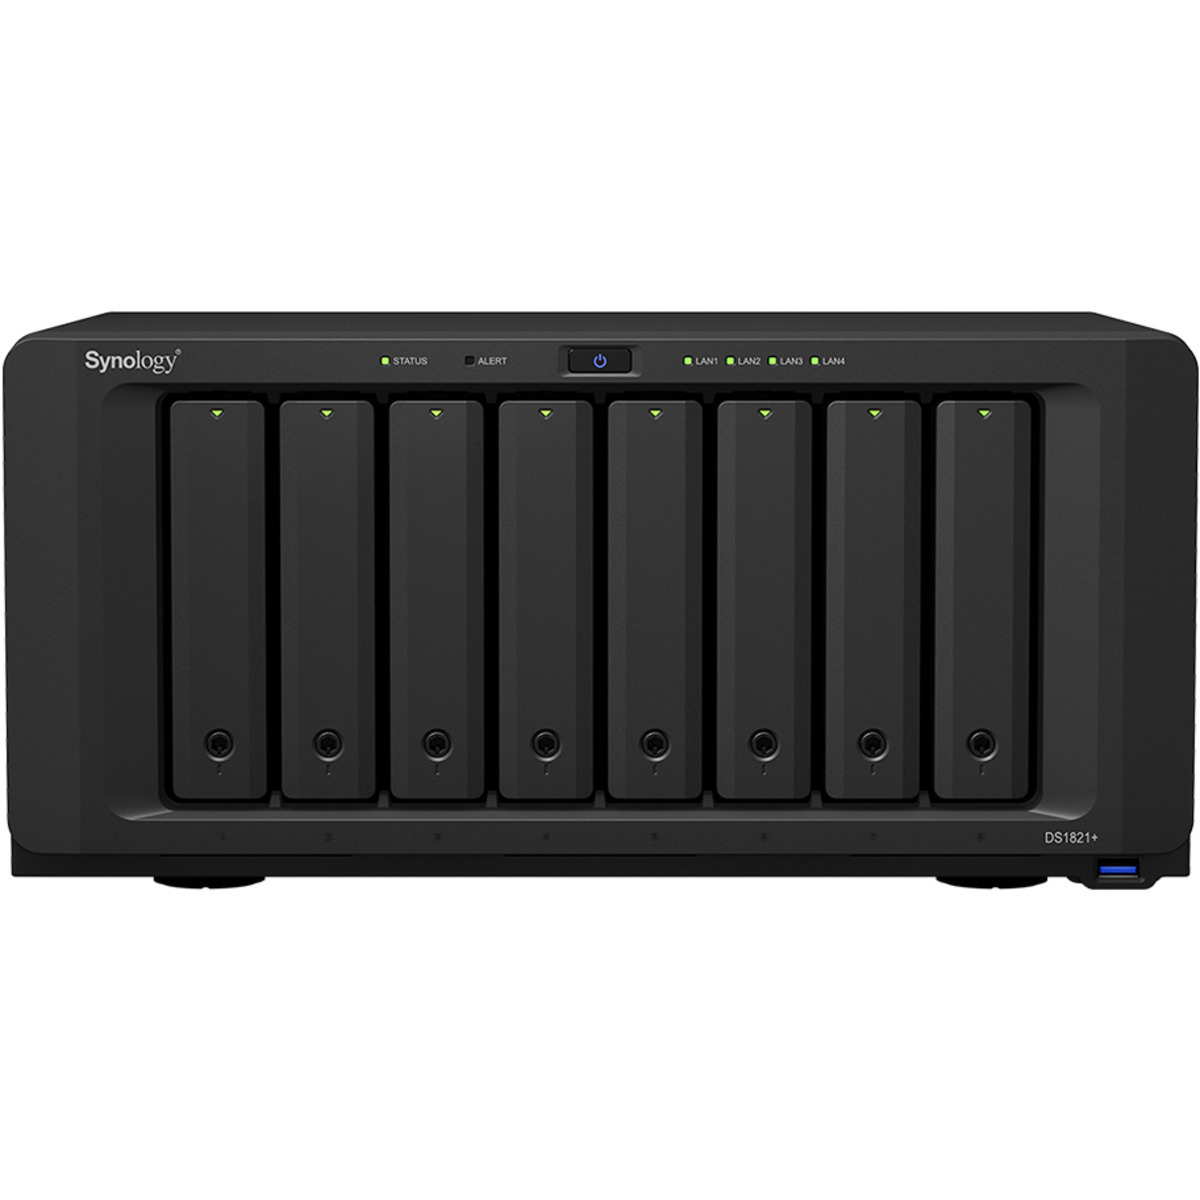 Synology DiskStation DS1821+ 80tb 8-Bay Desktop Multimedia / Power User / Business NAS - Network Attached Storage Device 8x10tb Seagate IronWolf Pro ST10000NT001 3.5 7200rpm SATA 6Gb/s HDD NAS Class Drives Installed - Burn-In Tested - ON SALE - FREE RAM UPGRADE DiskStation DS1821+